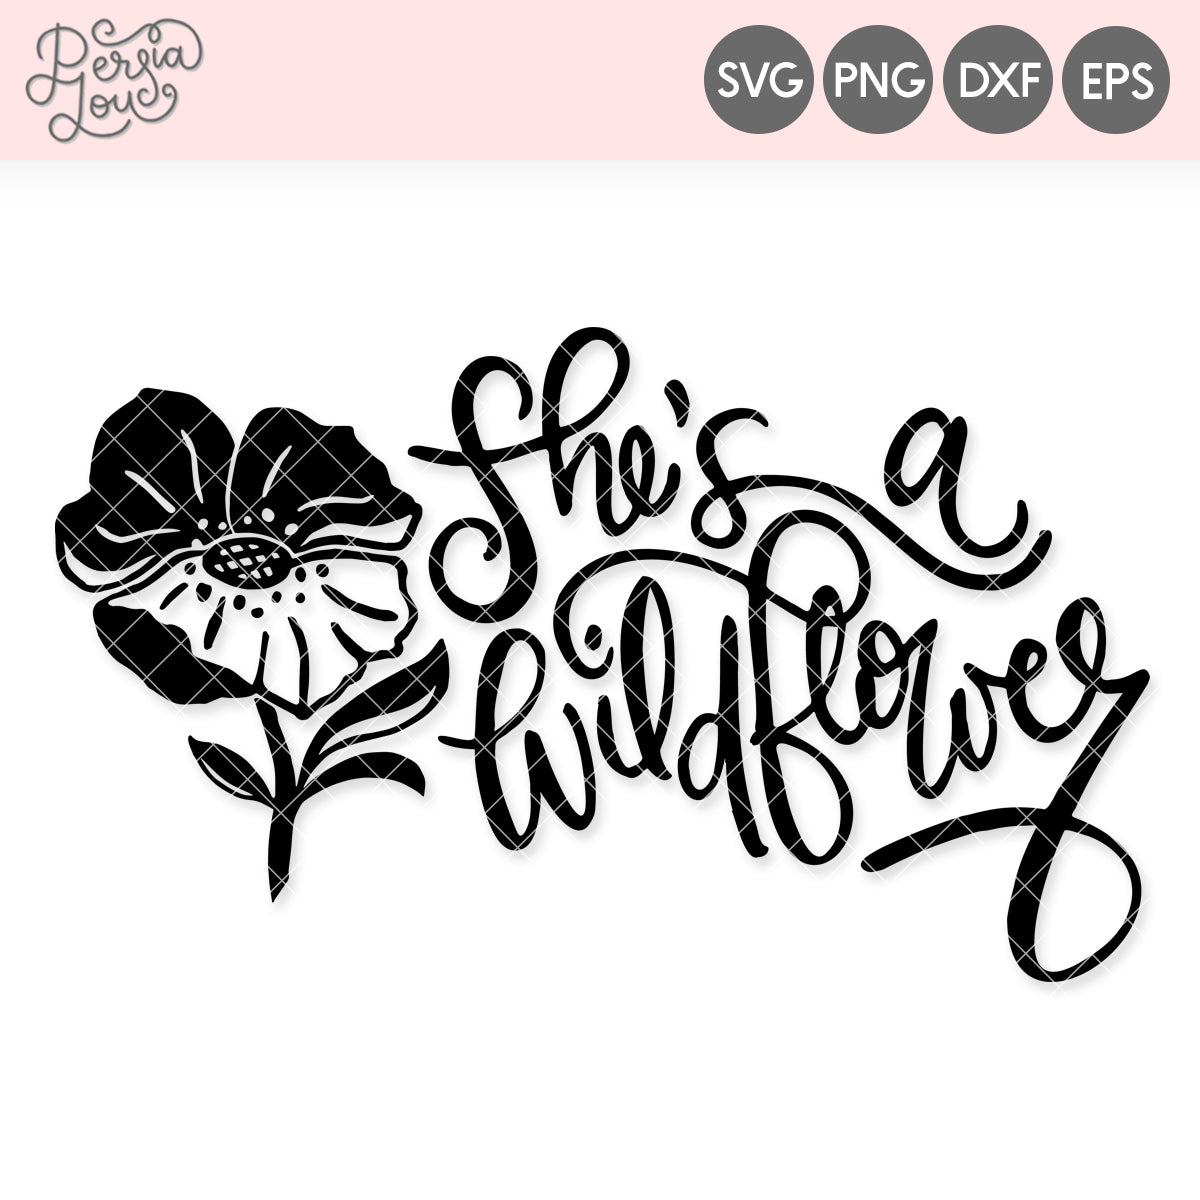 In A Field Of Roses She Is A Wildflower Svg, Flower Svg, Ros - Inspire  Uplift